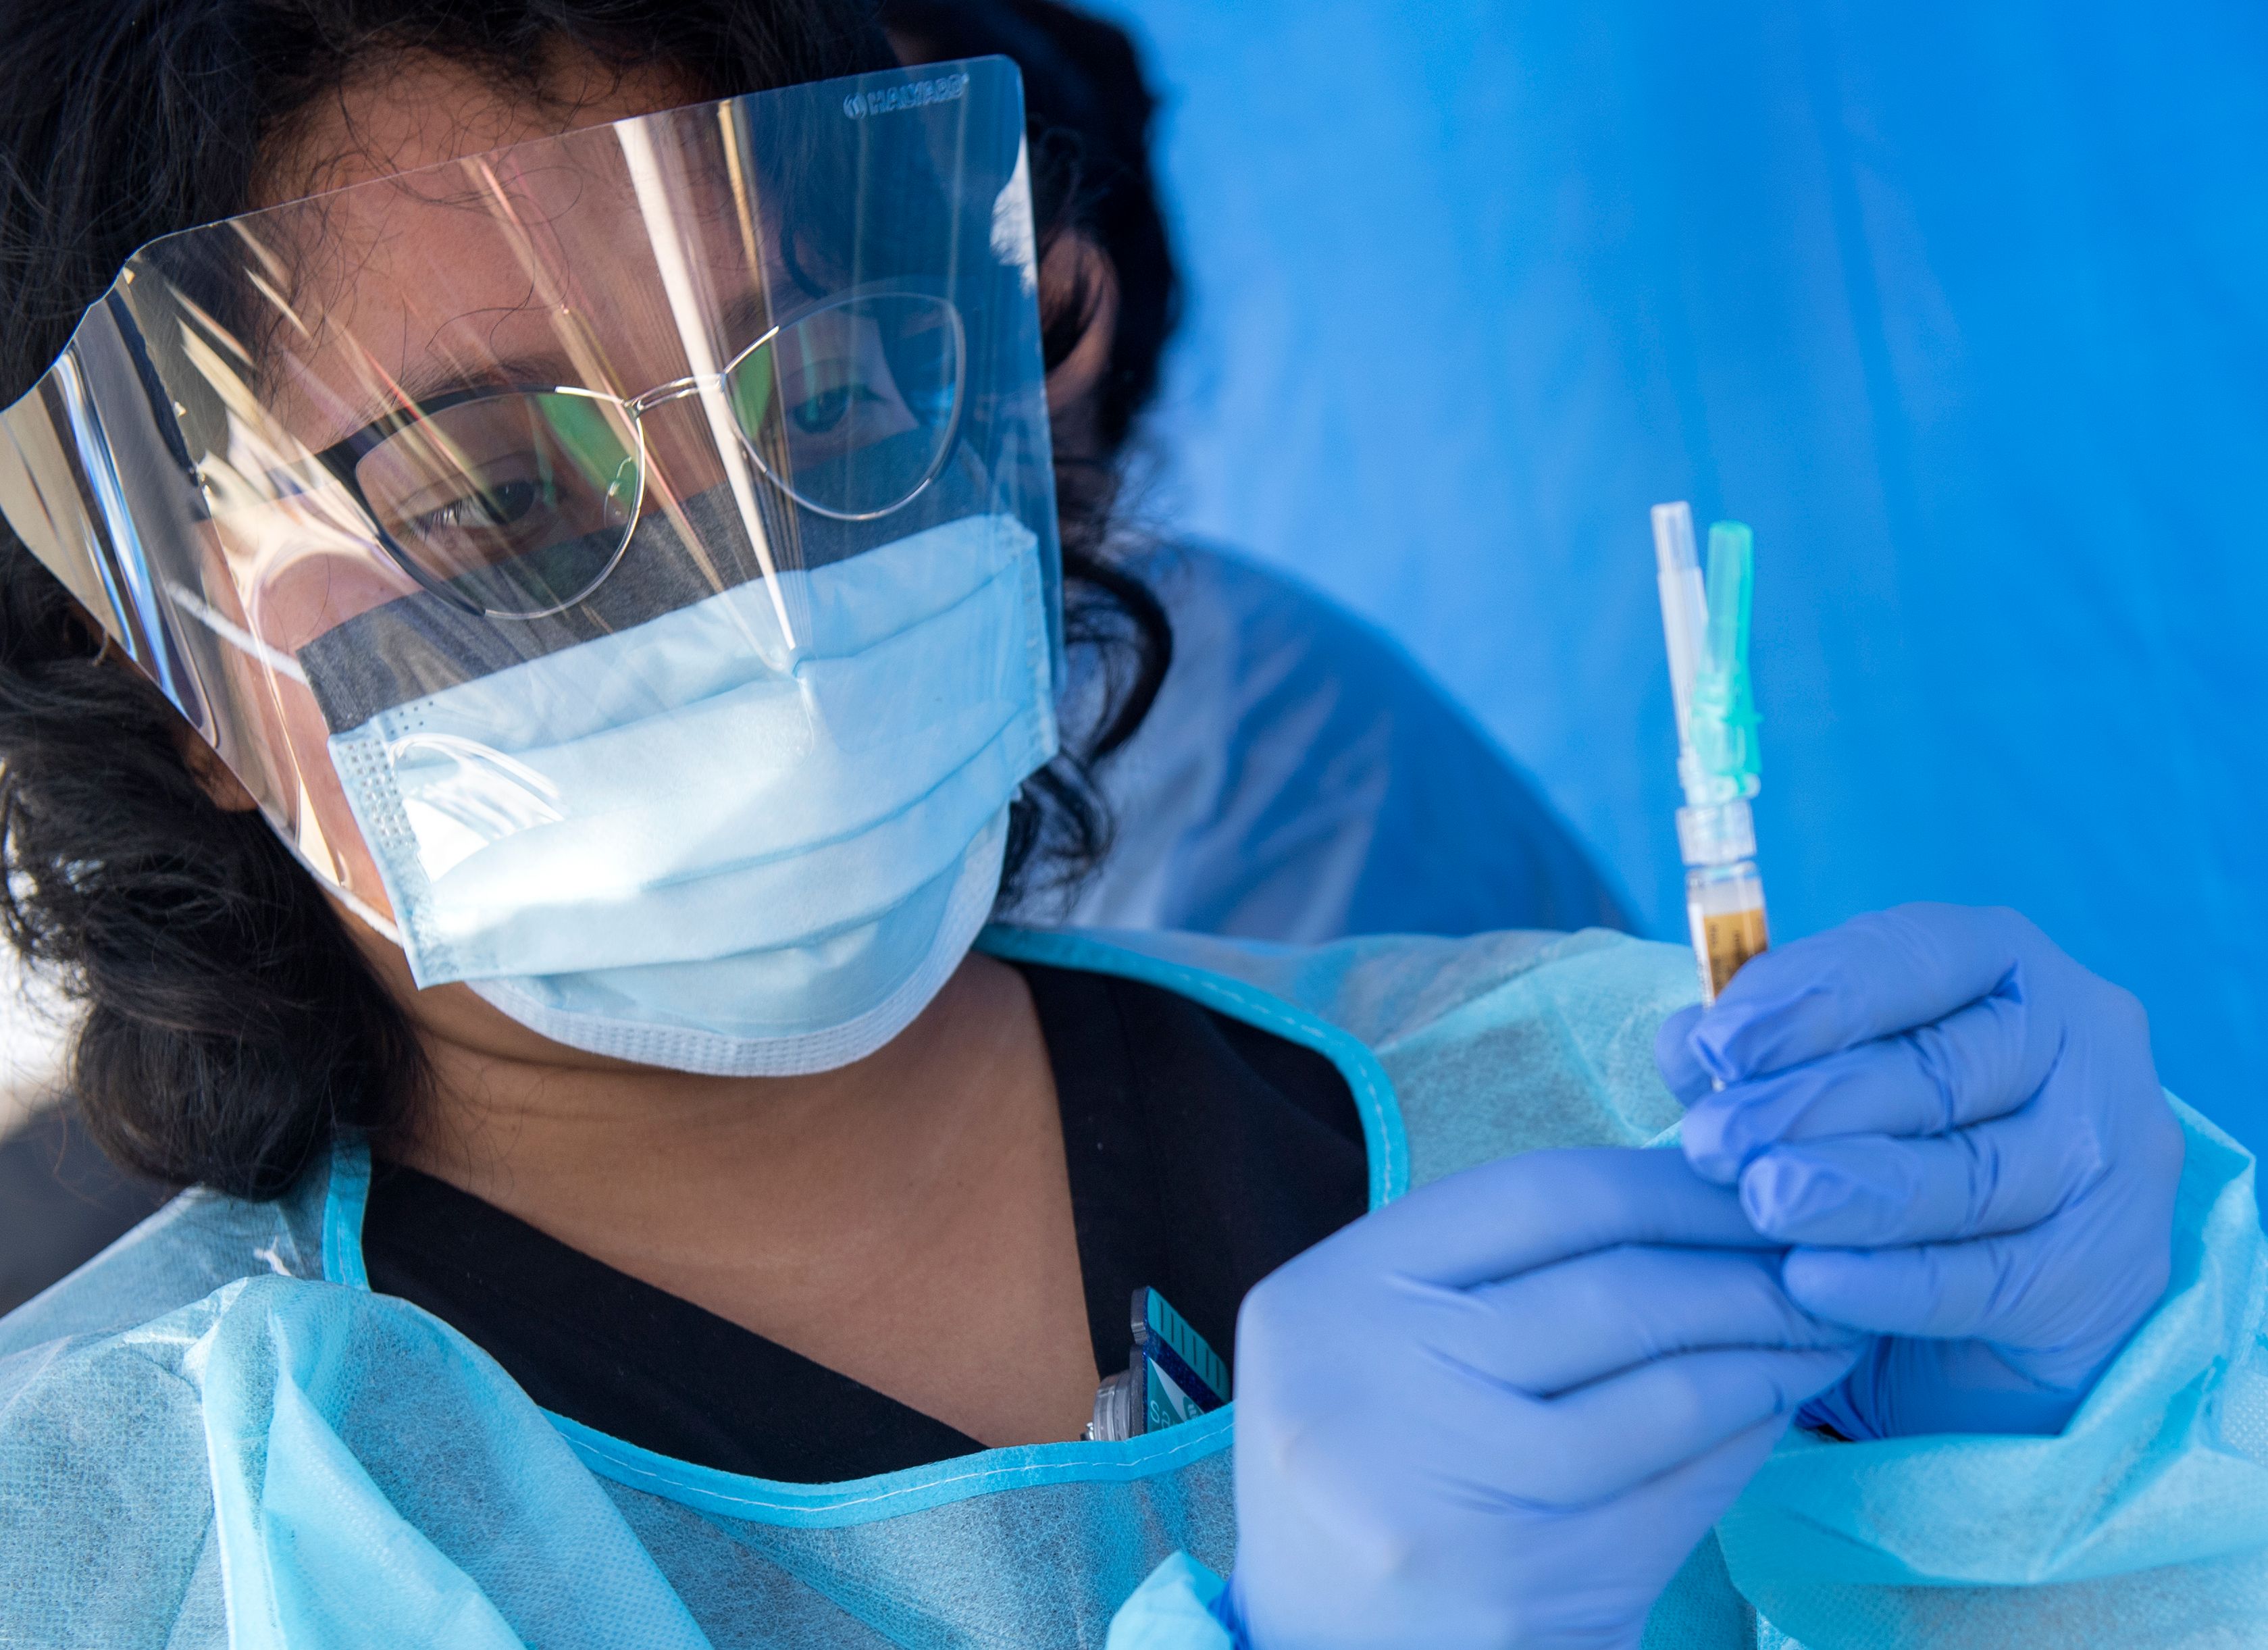 A health worker prepares a vaccine during the Saban Community Clinic Vaccine Drive Up for LA Children on August 12 in Los Angeles, California.